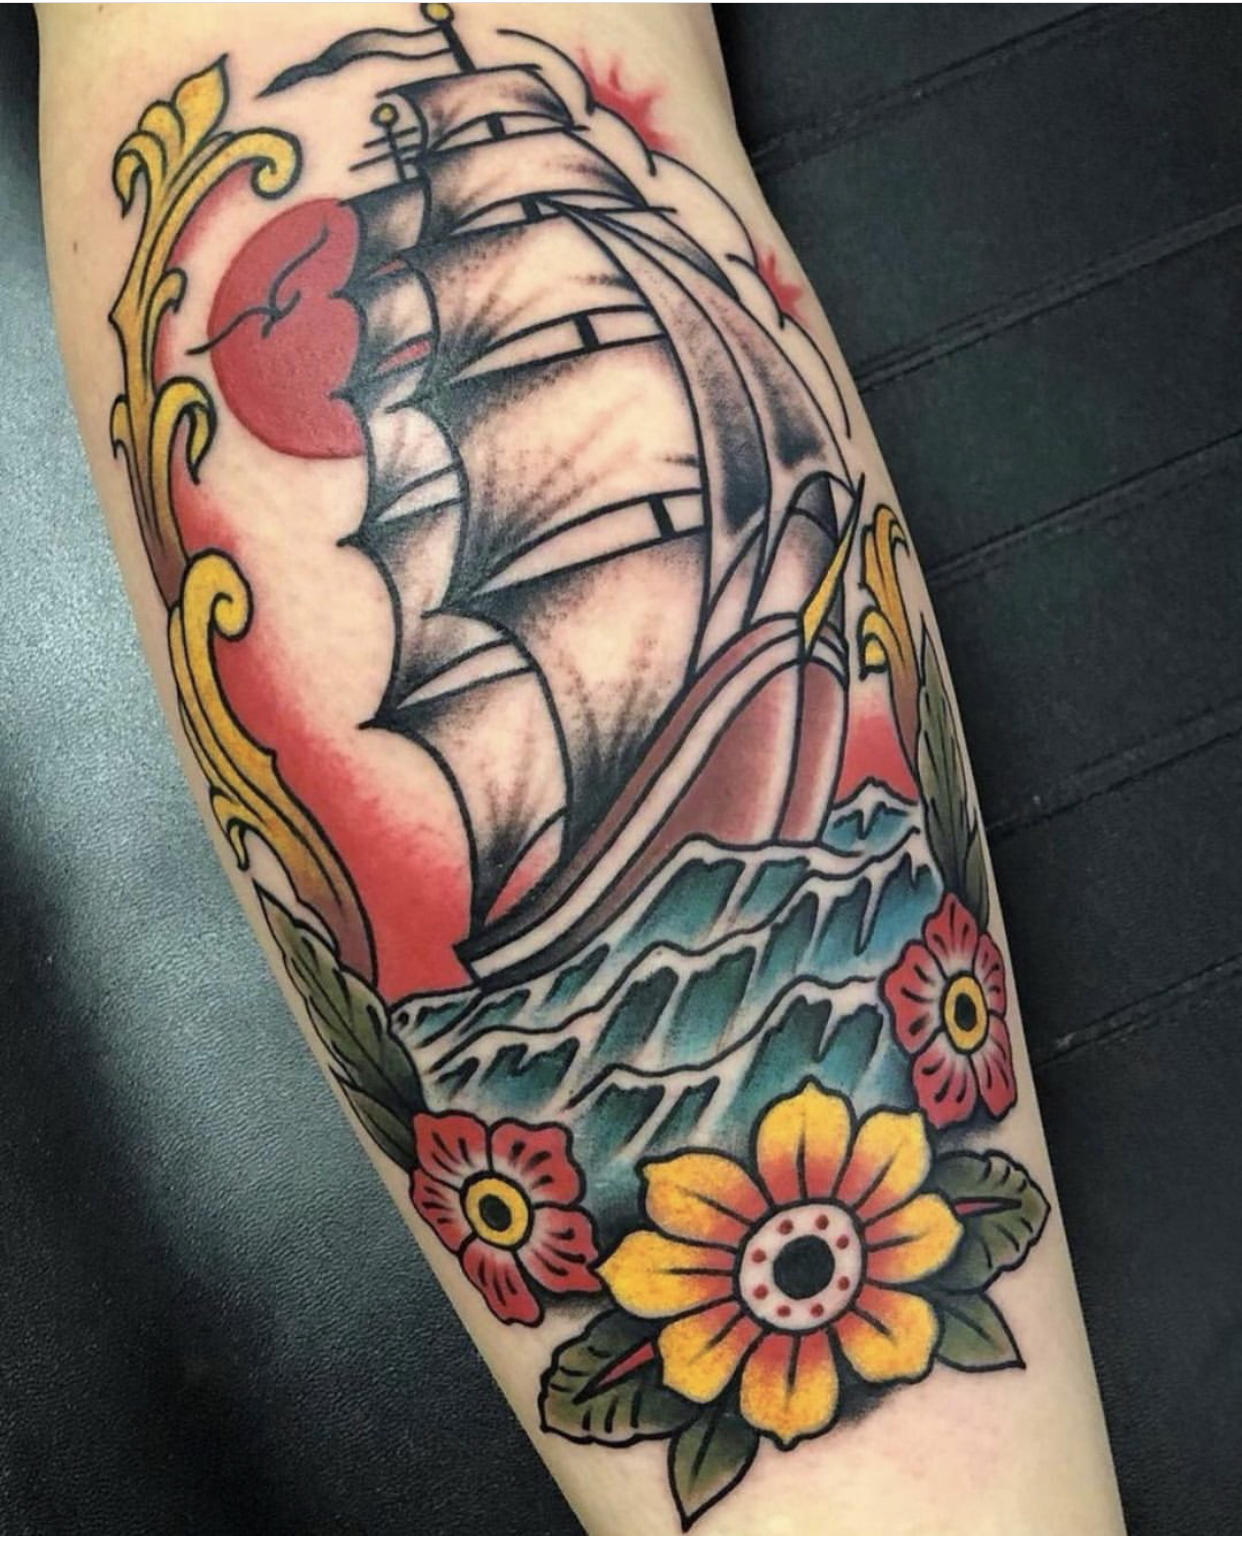 Tattoo of a boat from top tattoo shop in Dallas